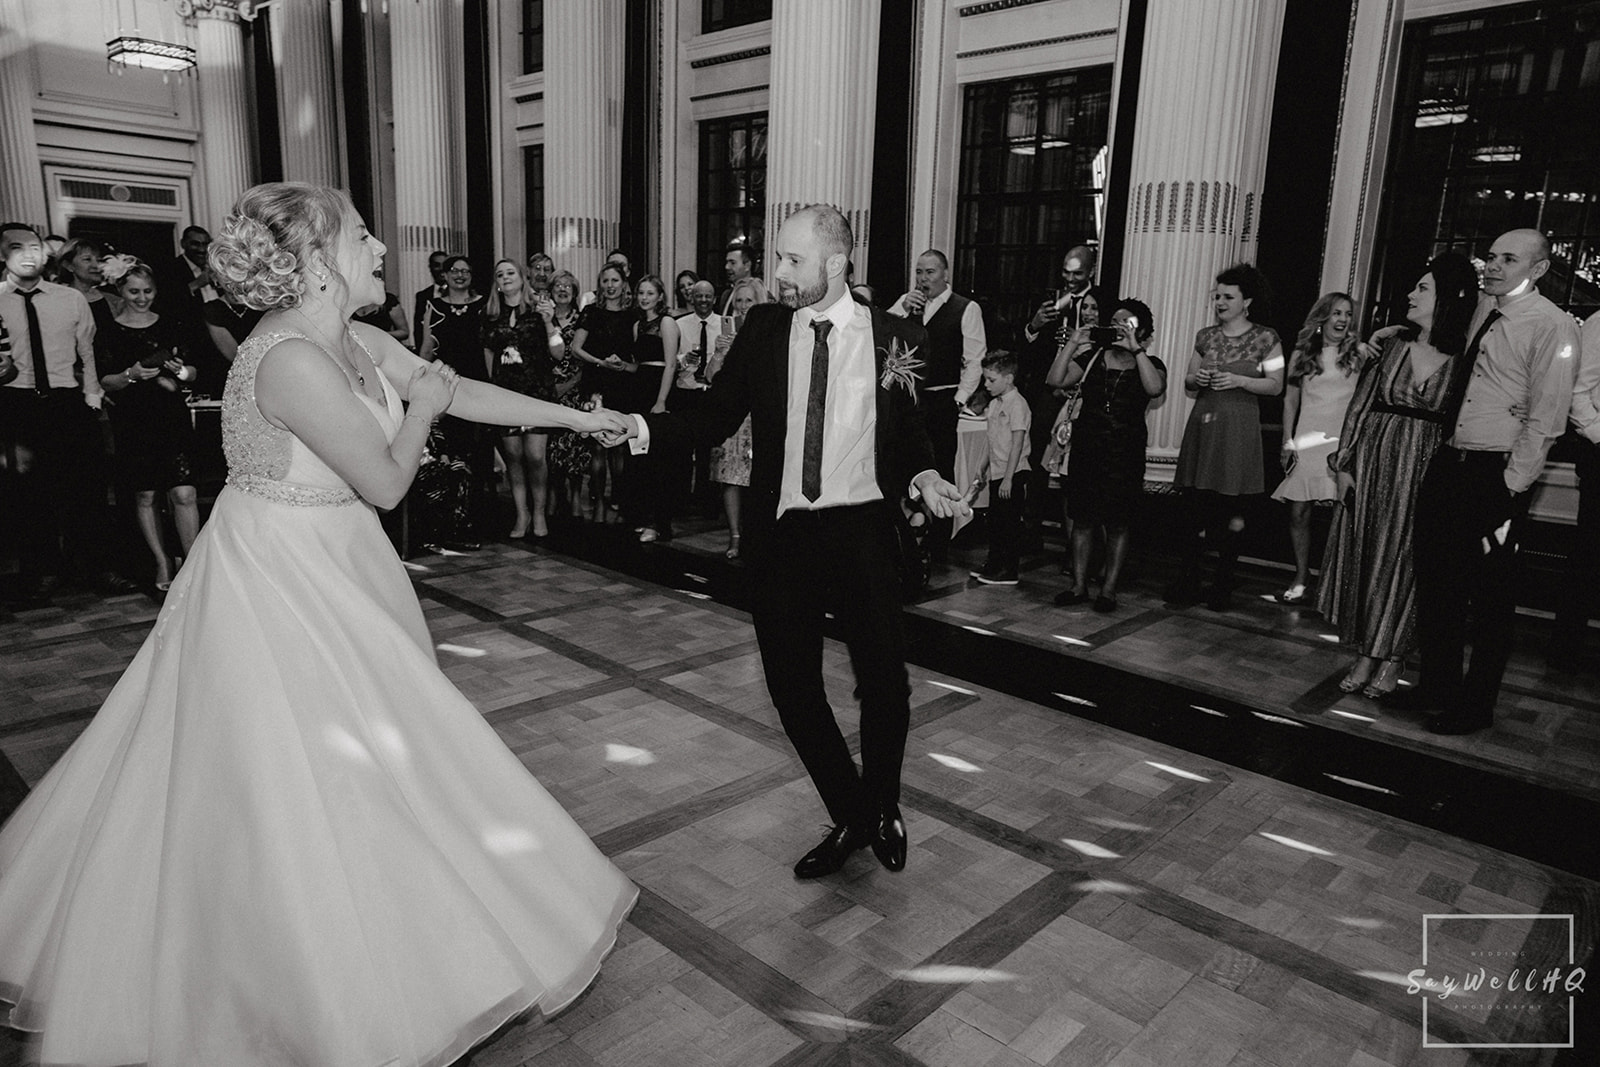 Wedding Photography First dance photos - bride and groom dance in the ballroom
